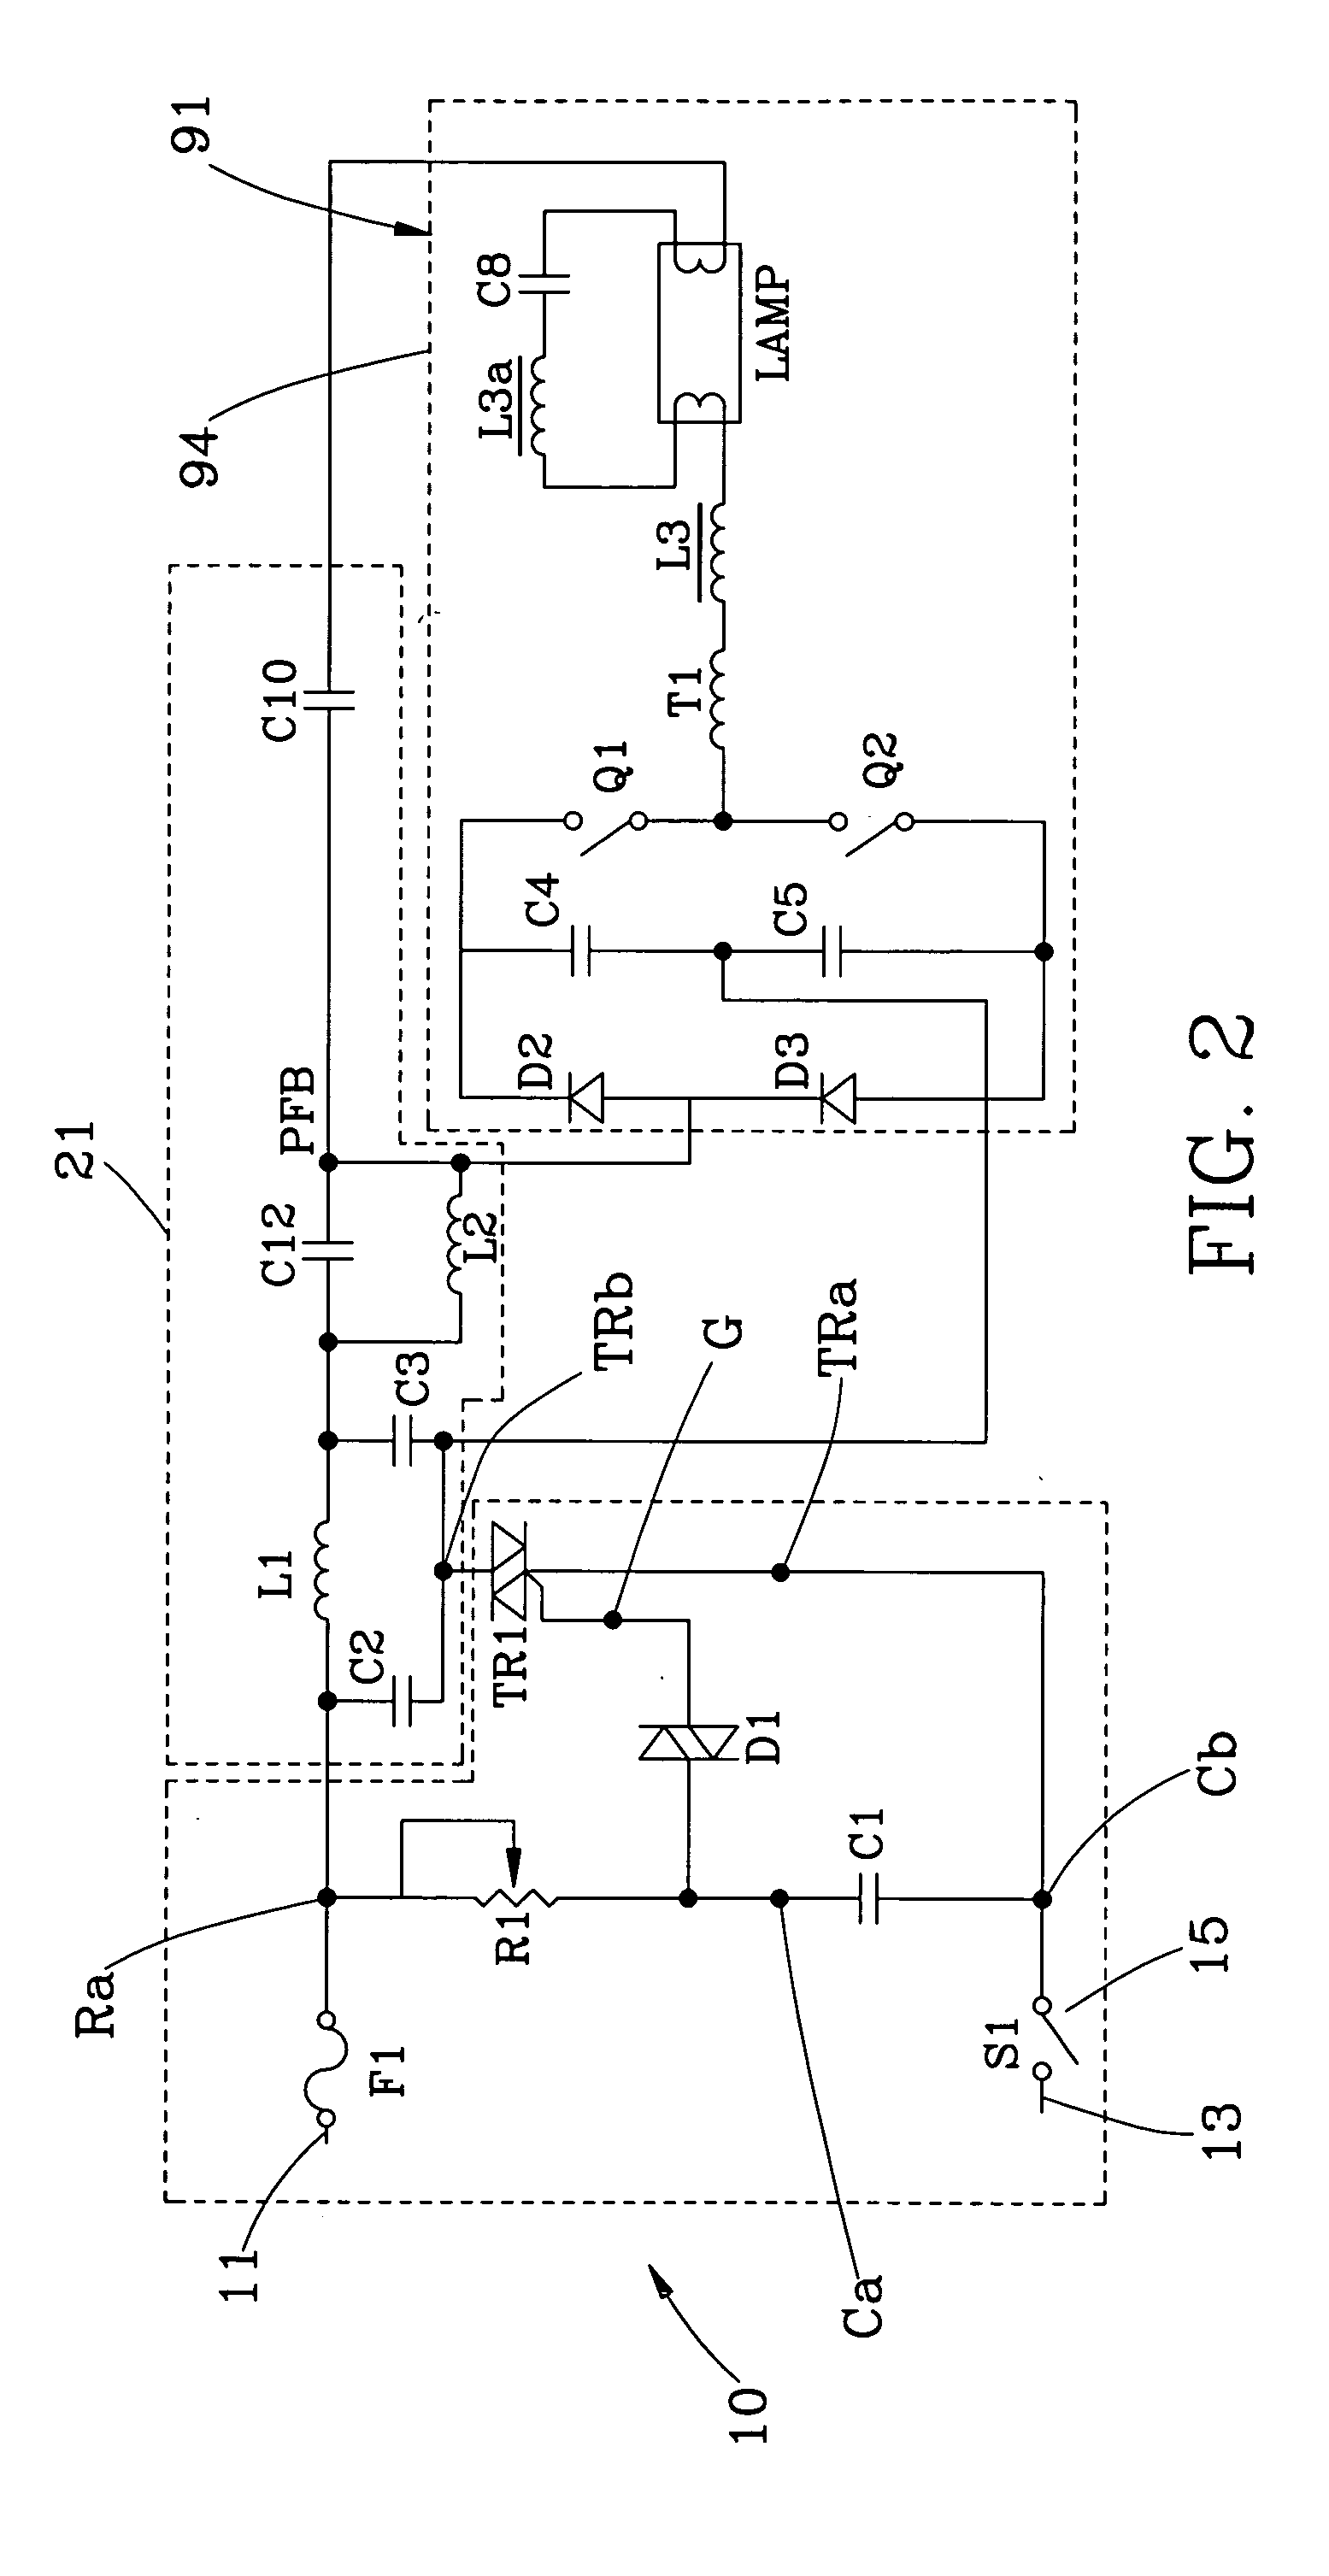 Dimming circuit for a gas-discharge lamp